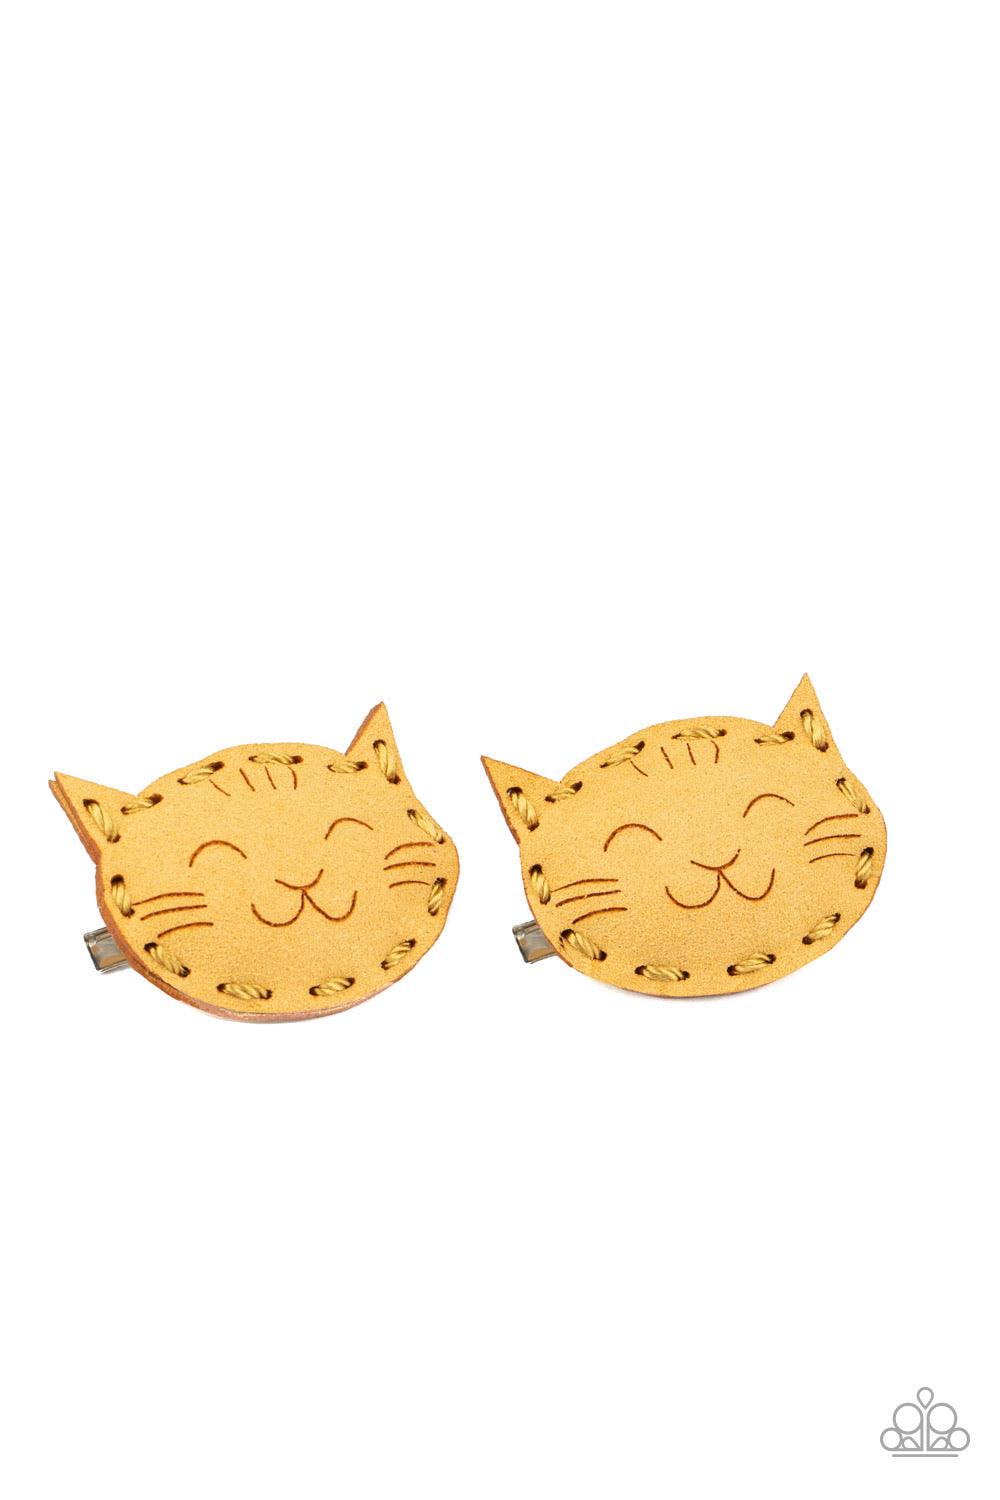 MEOW Youre Talking ~Yellow - Beautifully Blinged